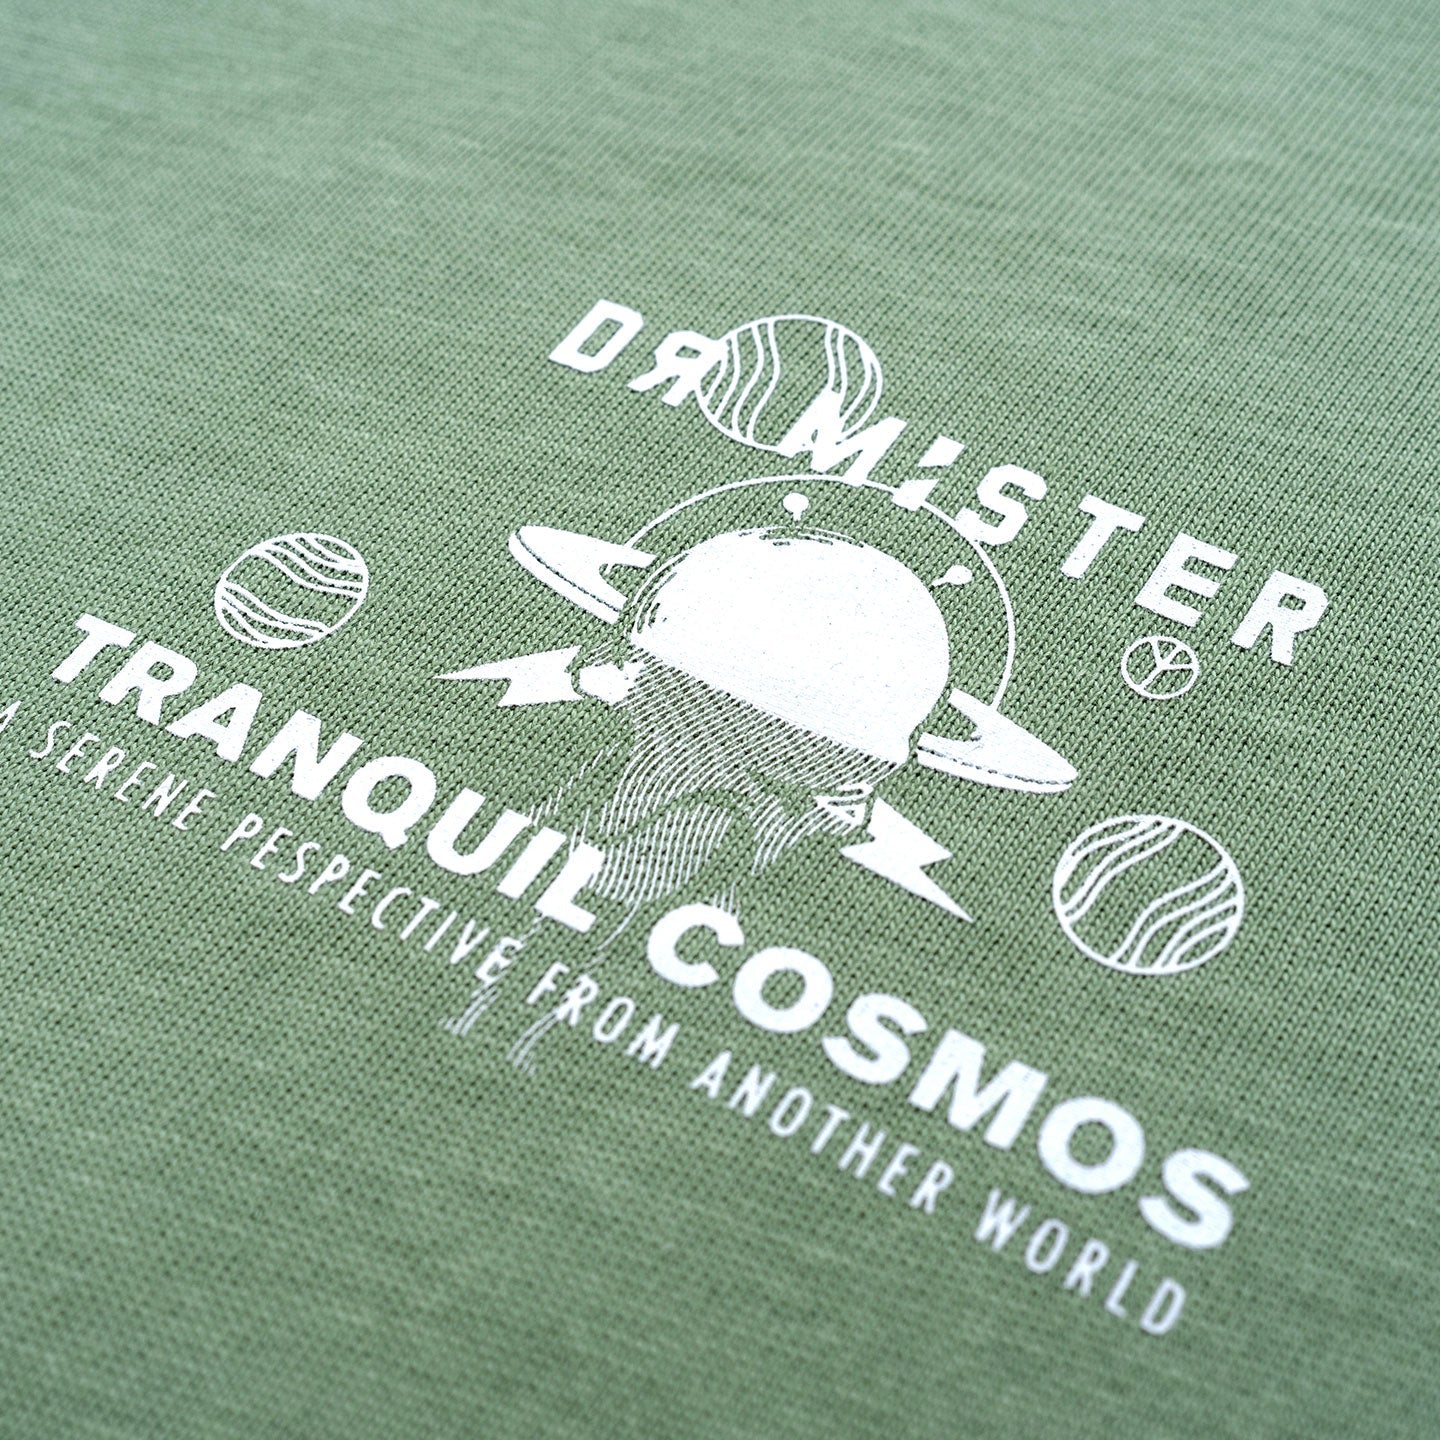 Spaced Out Broad Tee - Moss Green